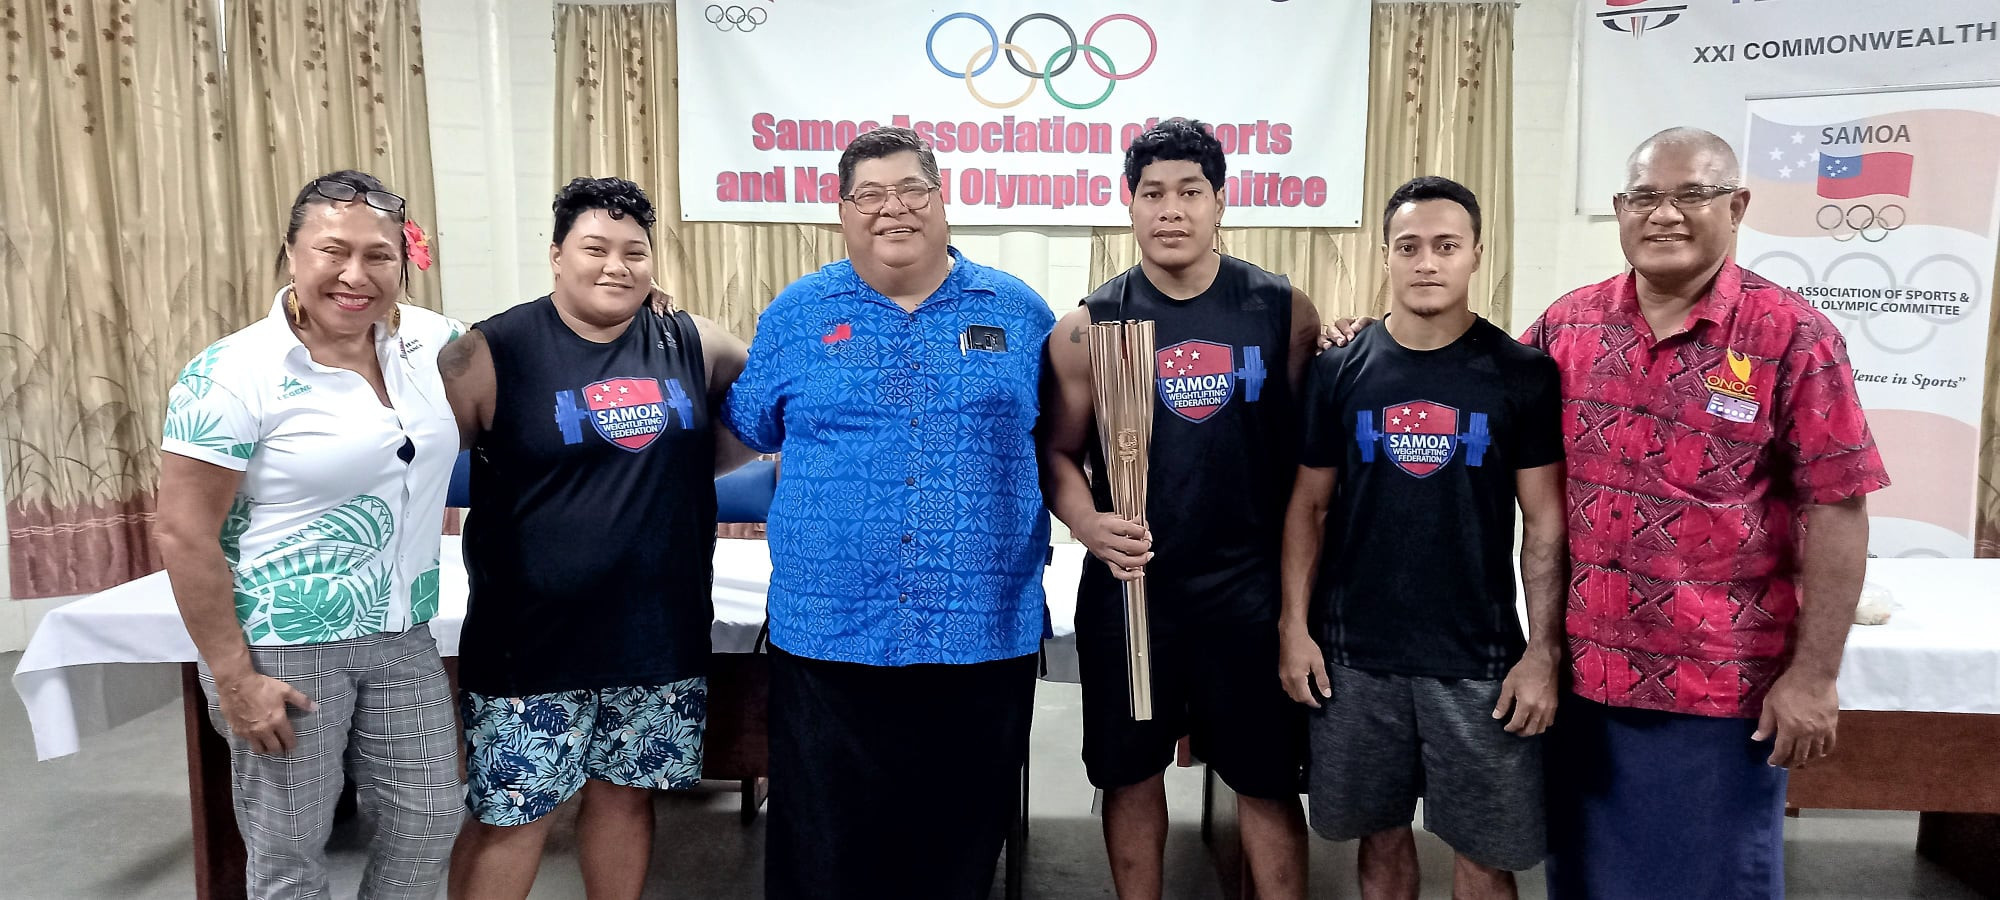 Samoa's Tokyo 2020 weightlifting absentees receive Olympic uniforms and gifts